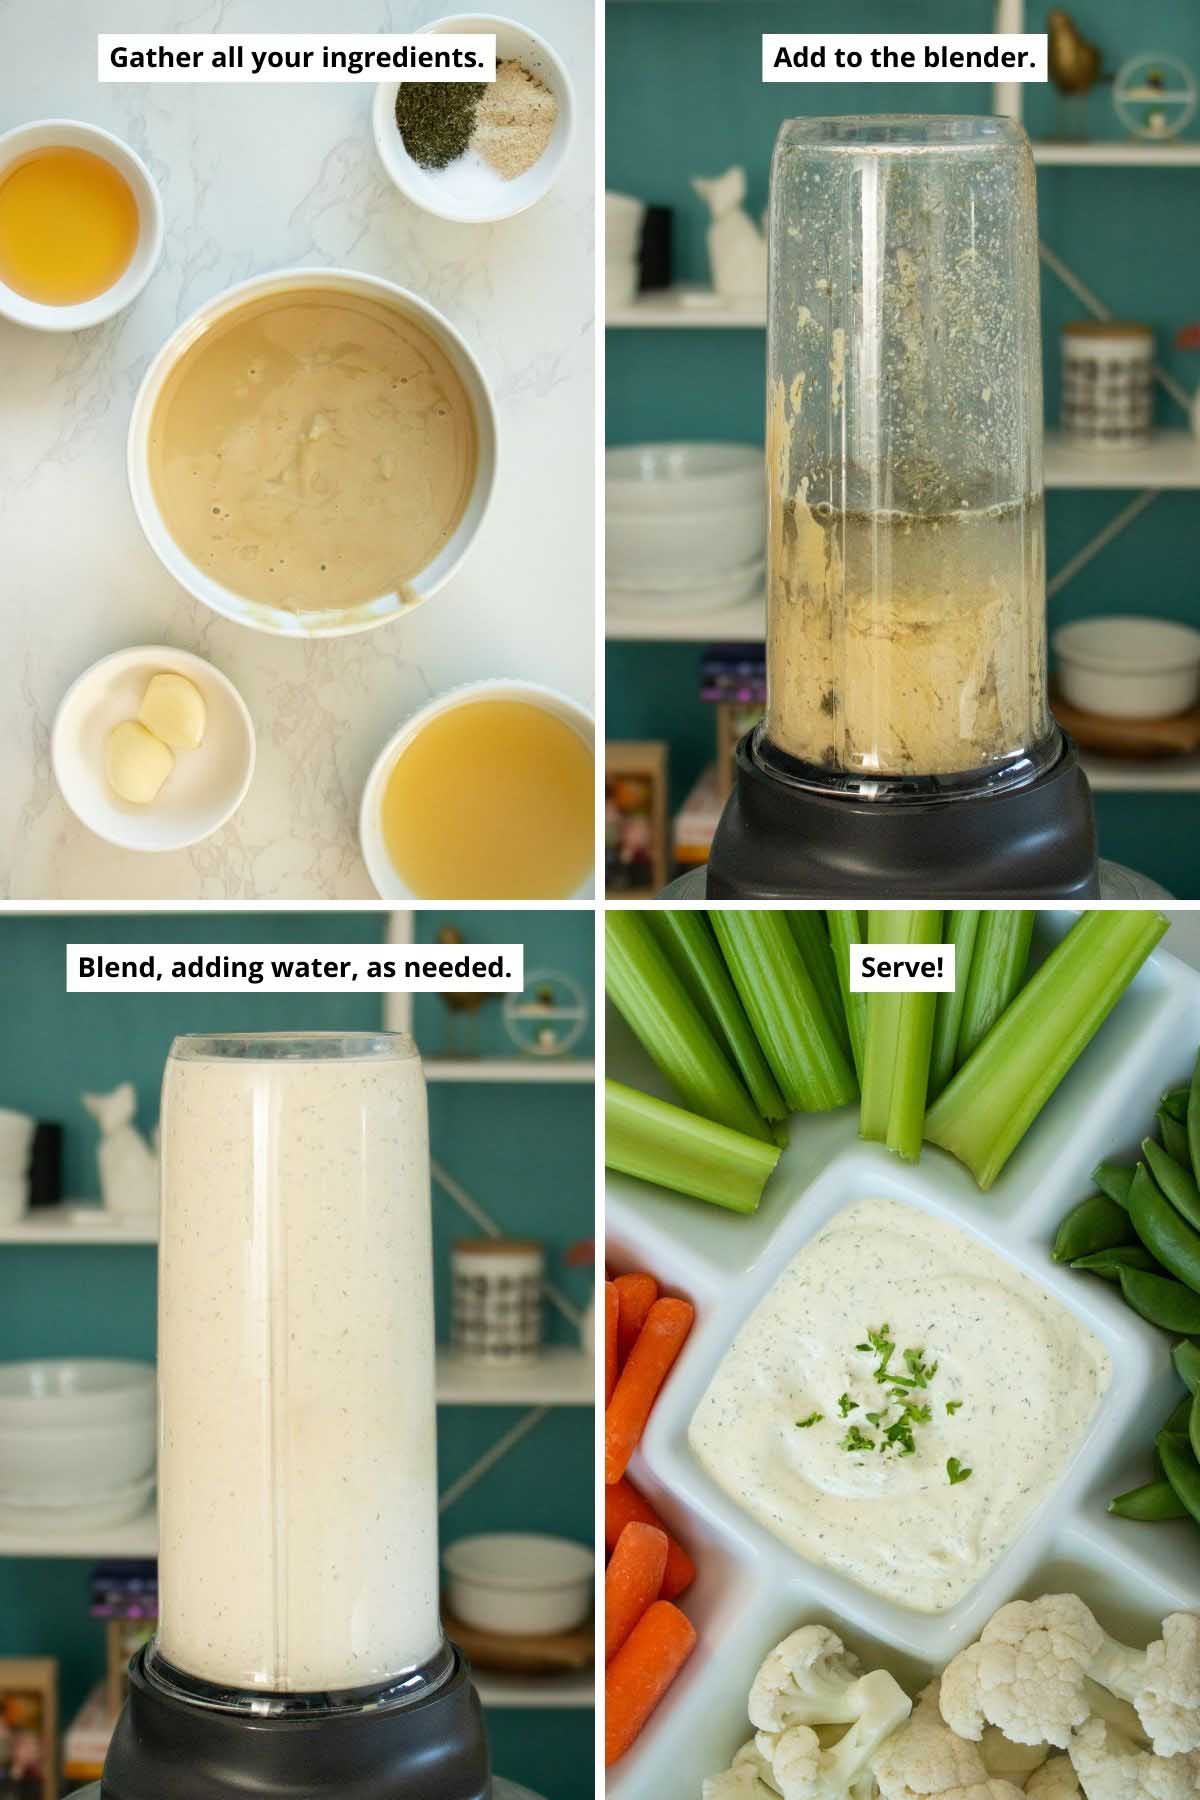 image collage showing ingredients before and after adding to the blender and after blending both in the blender and in a serving tray of vegetables